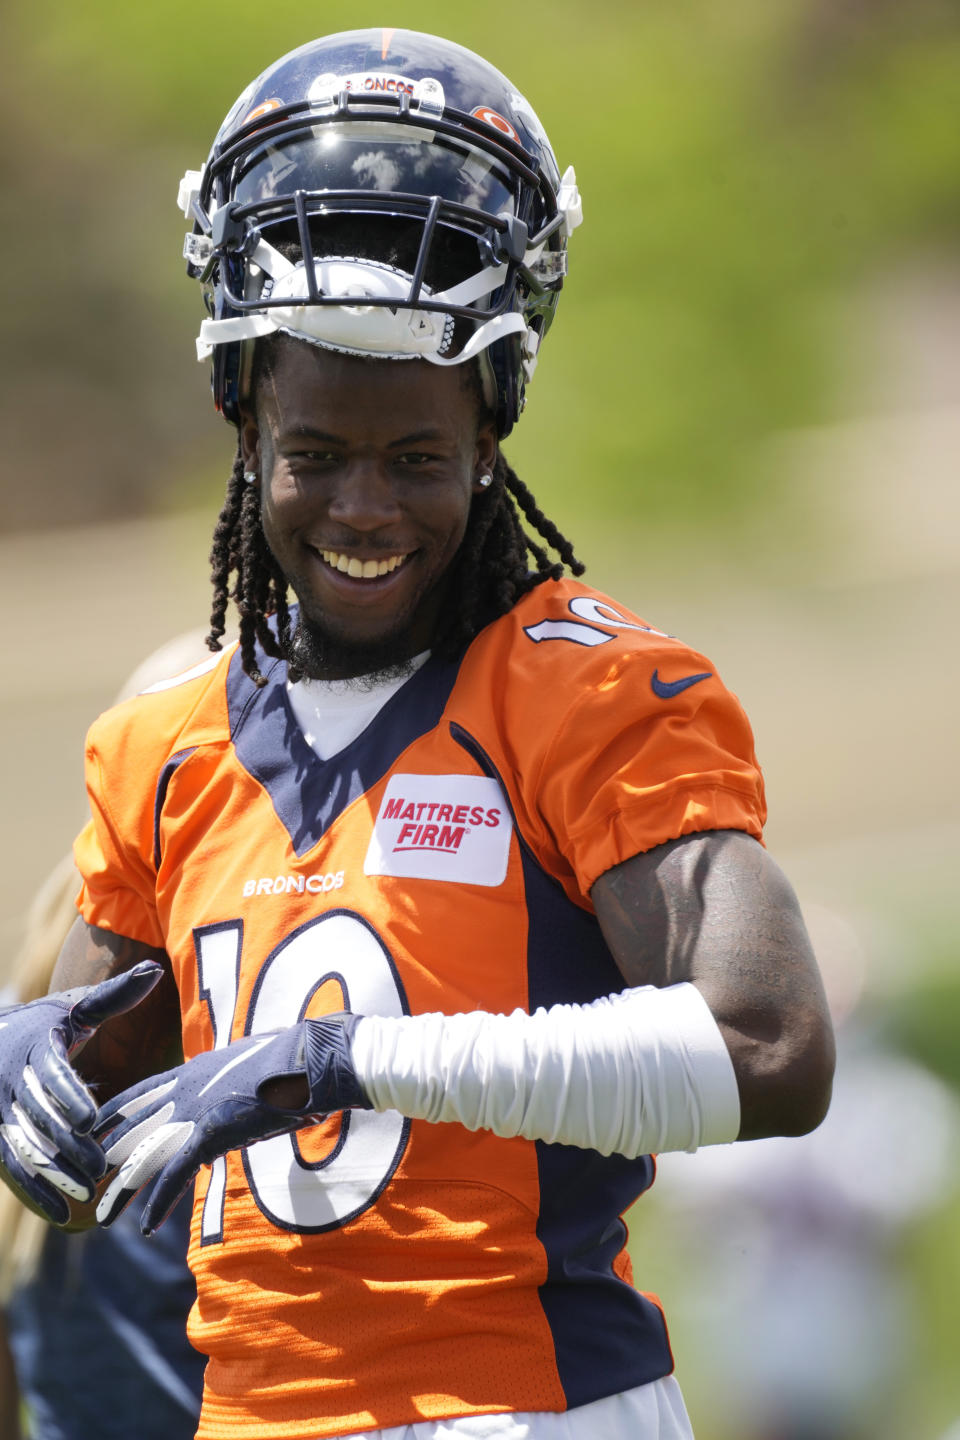 Denver Broncos wide receiver Jerry Jeudy attends drills at the NFL football team's headquarters Monday, June 6, 2022, in Centennial, Colo. (AP Photo/David Zalubowski)